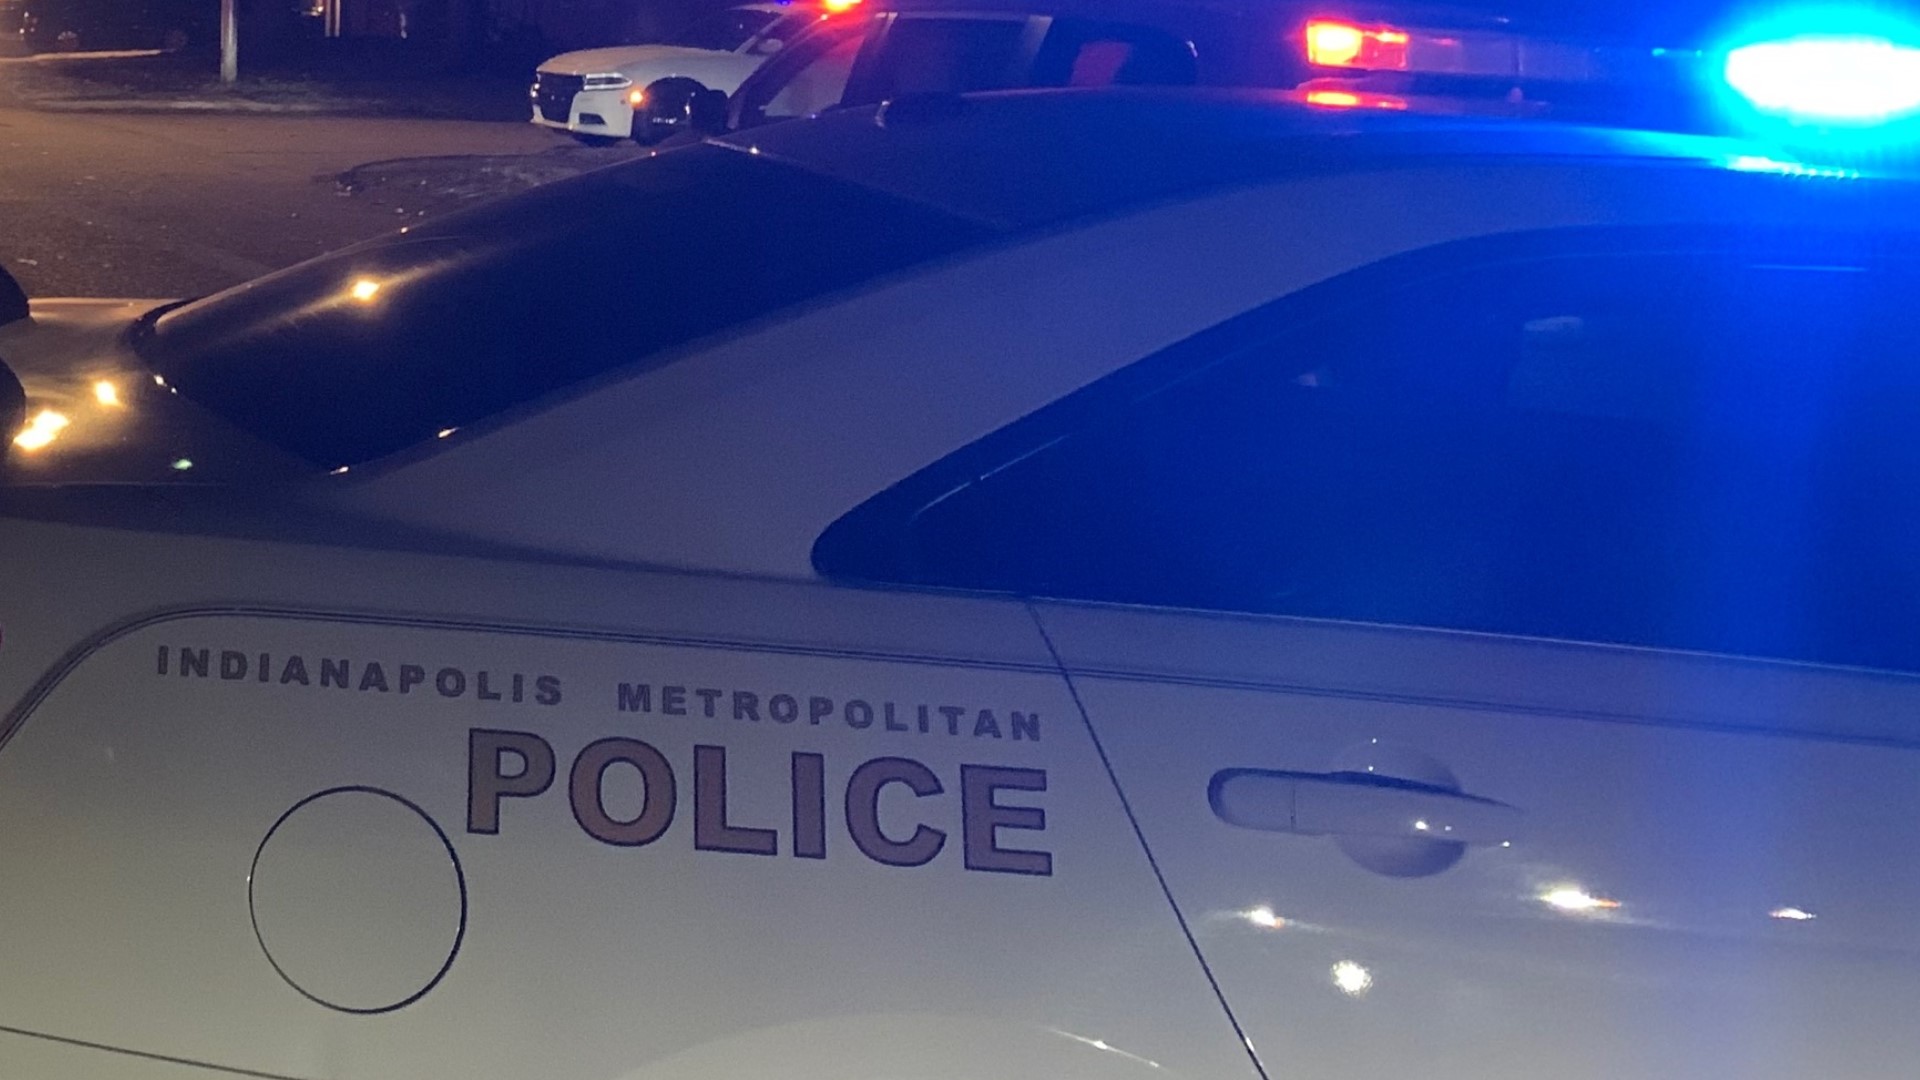 A man found with traumatic injuries on South Street shortly after 3:15 a.m. died at the hospital, prompting a homicide investigation.